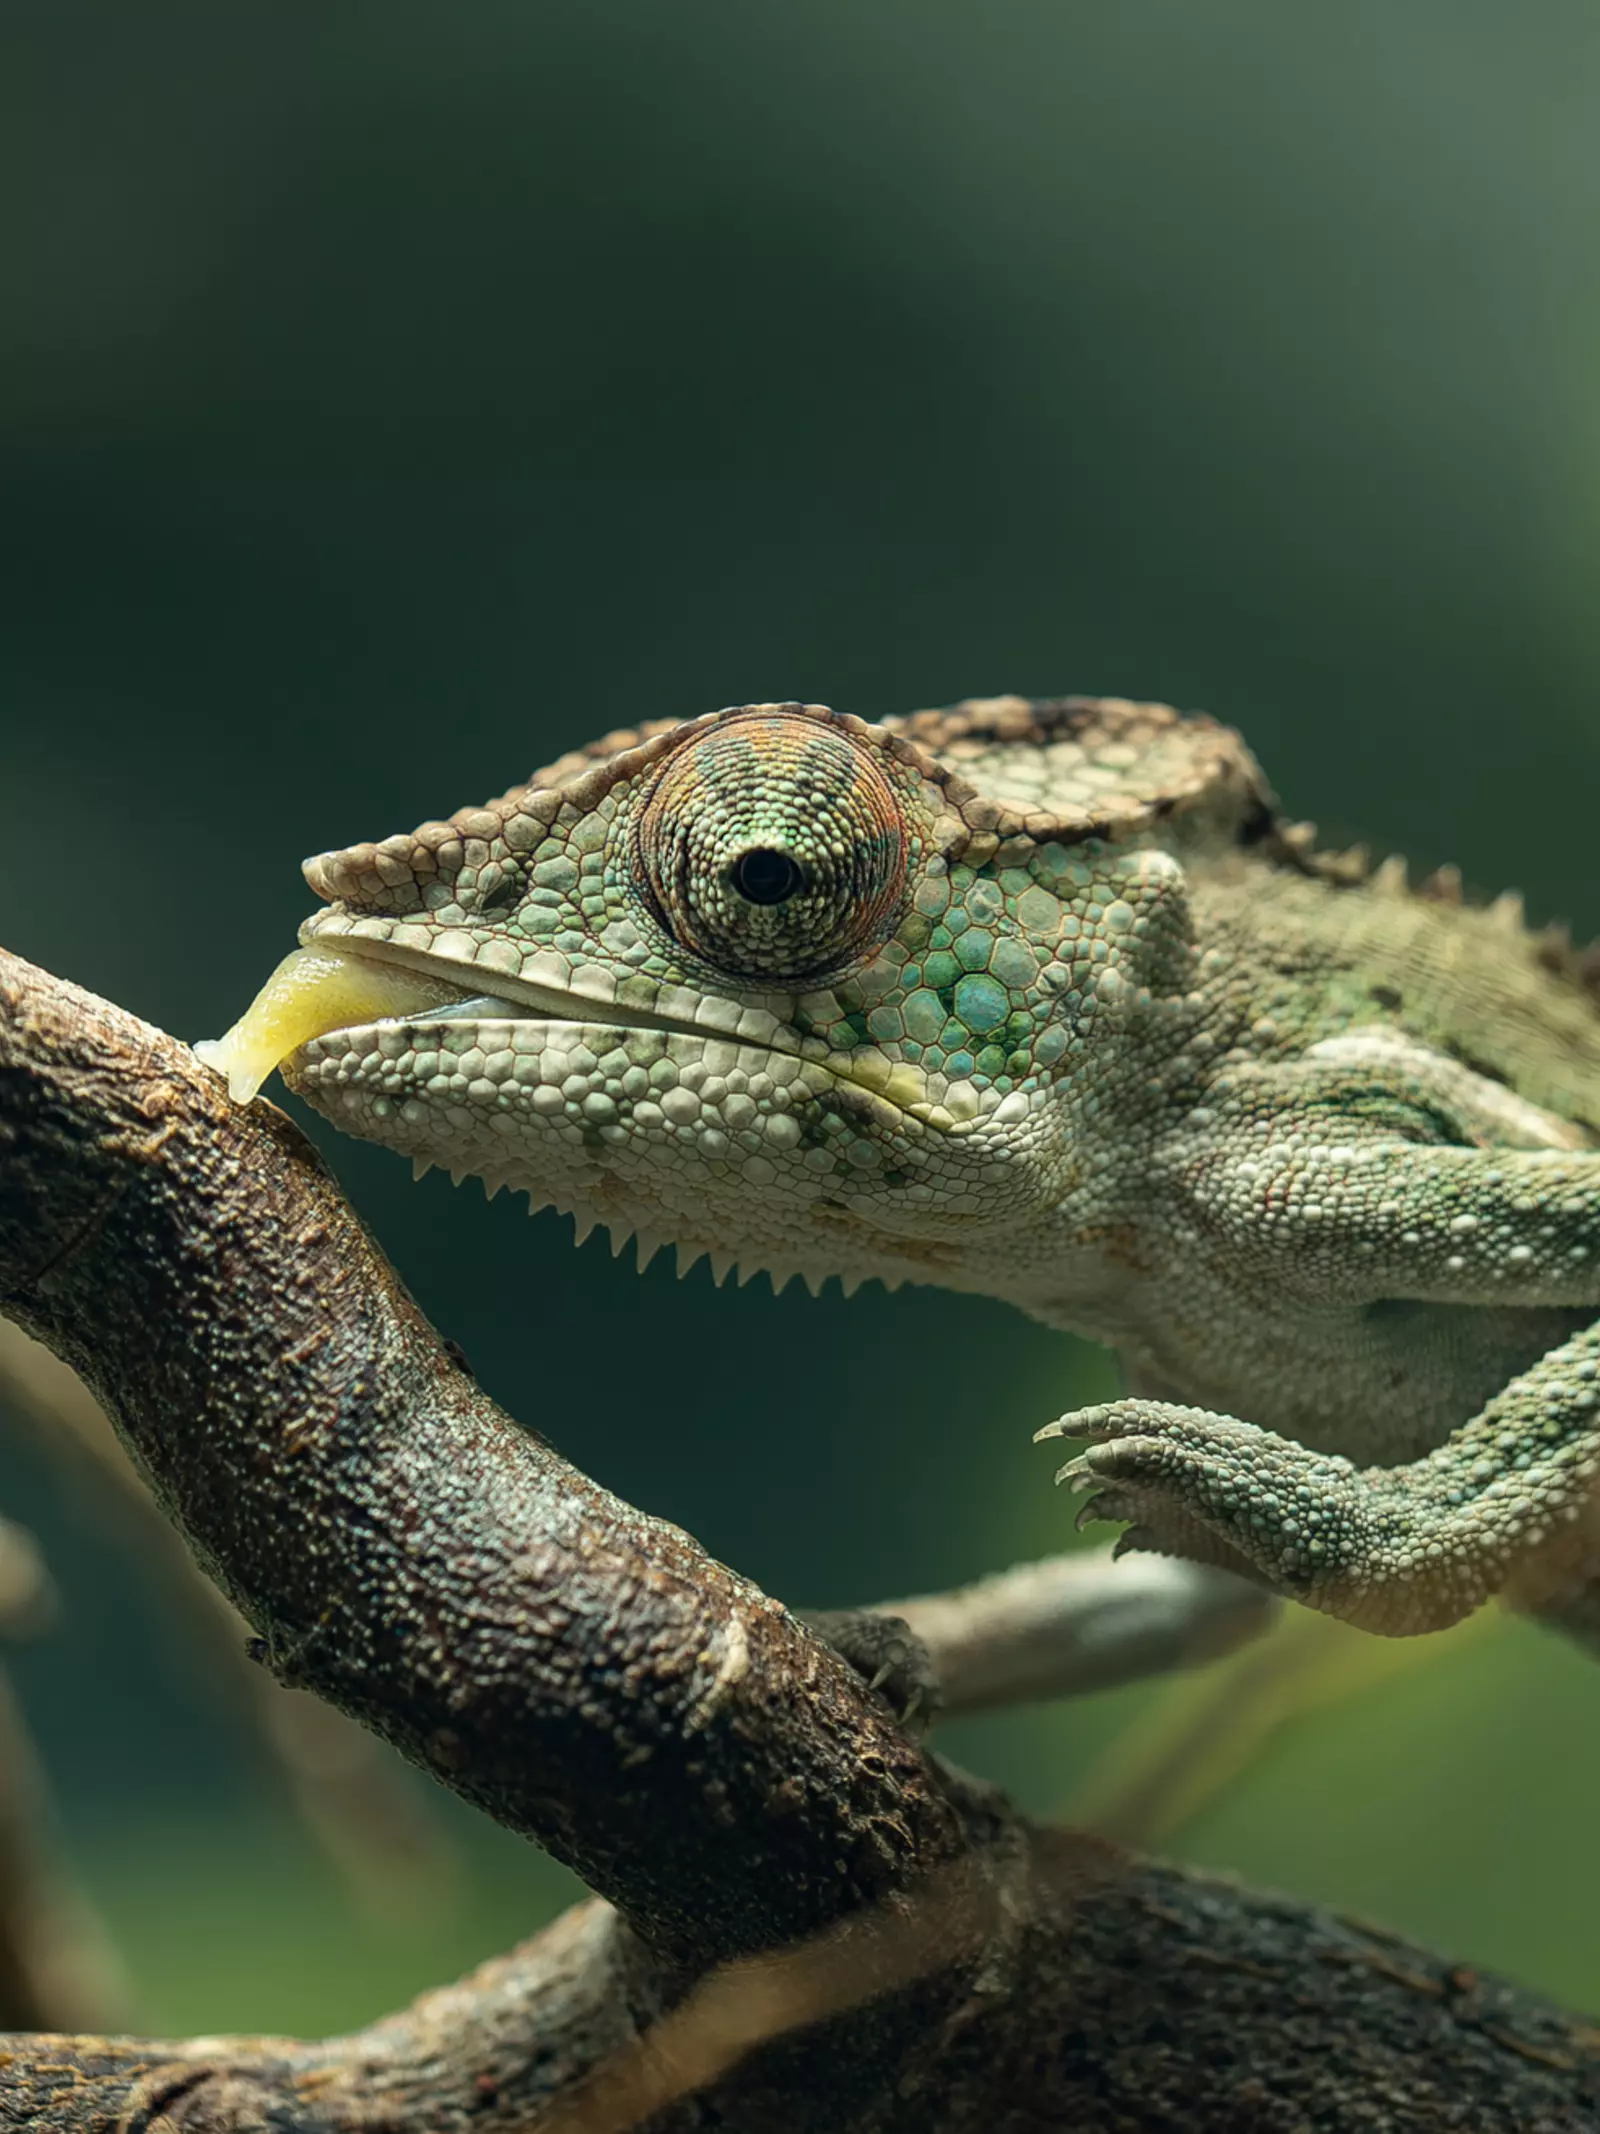 Panther chameleon close-up with tongue out